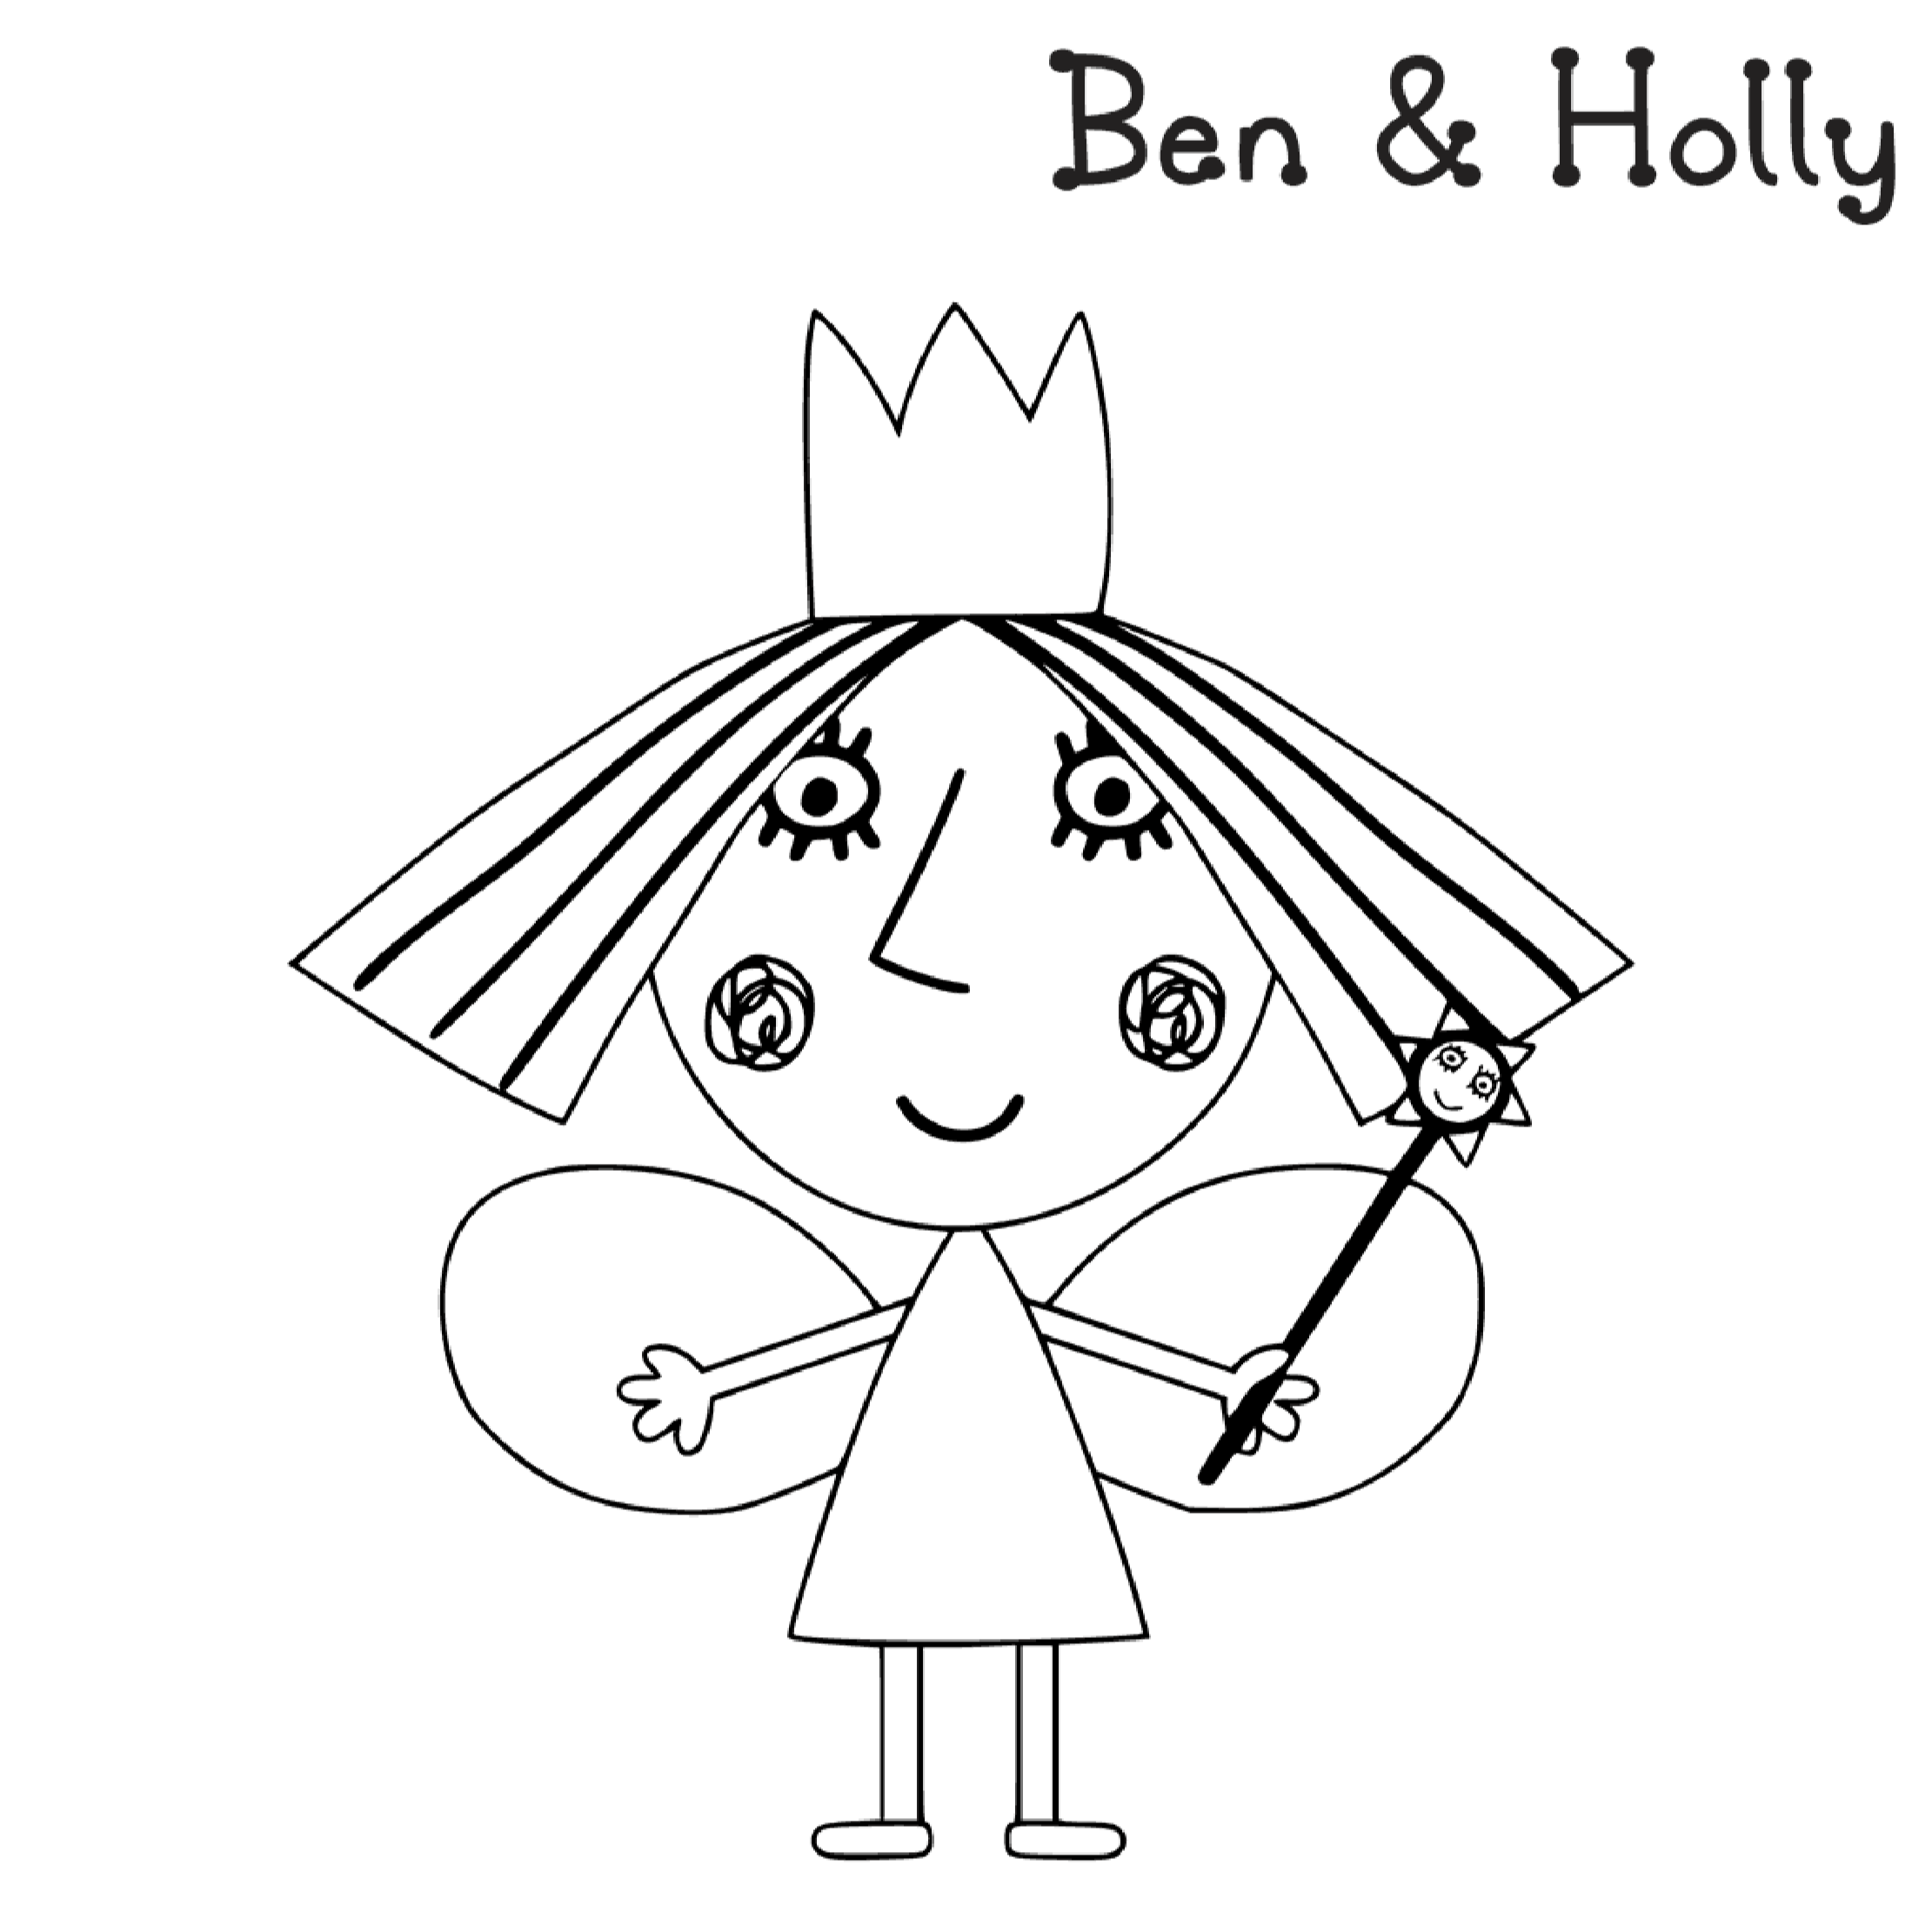 Ben and Holly Coloring for kids - Coloring pages for kids on Coloring -Forkids.com